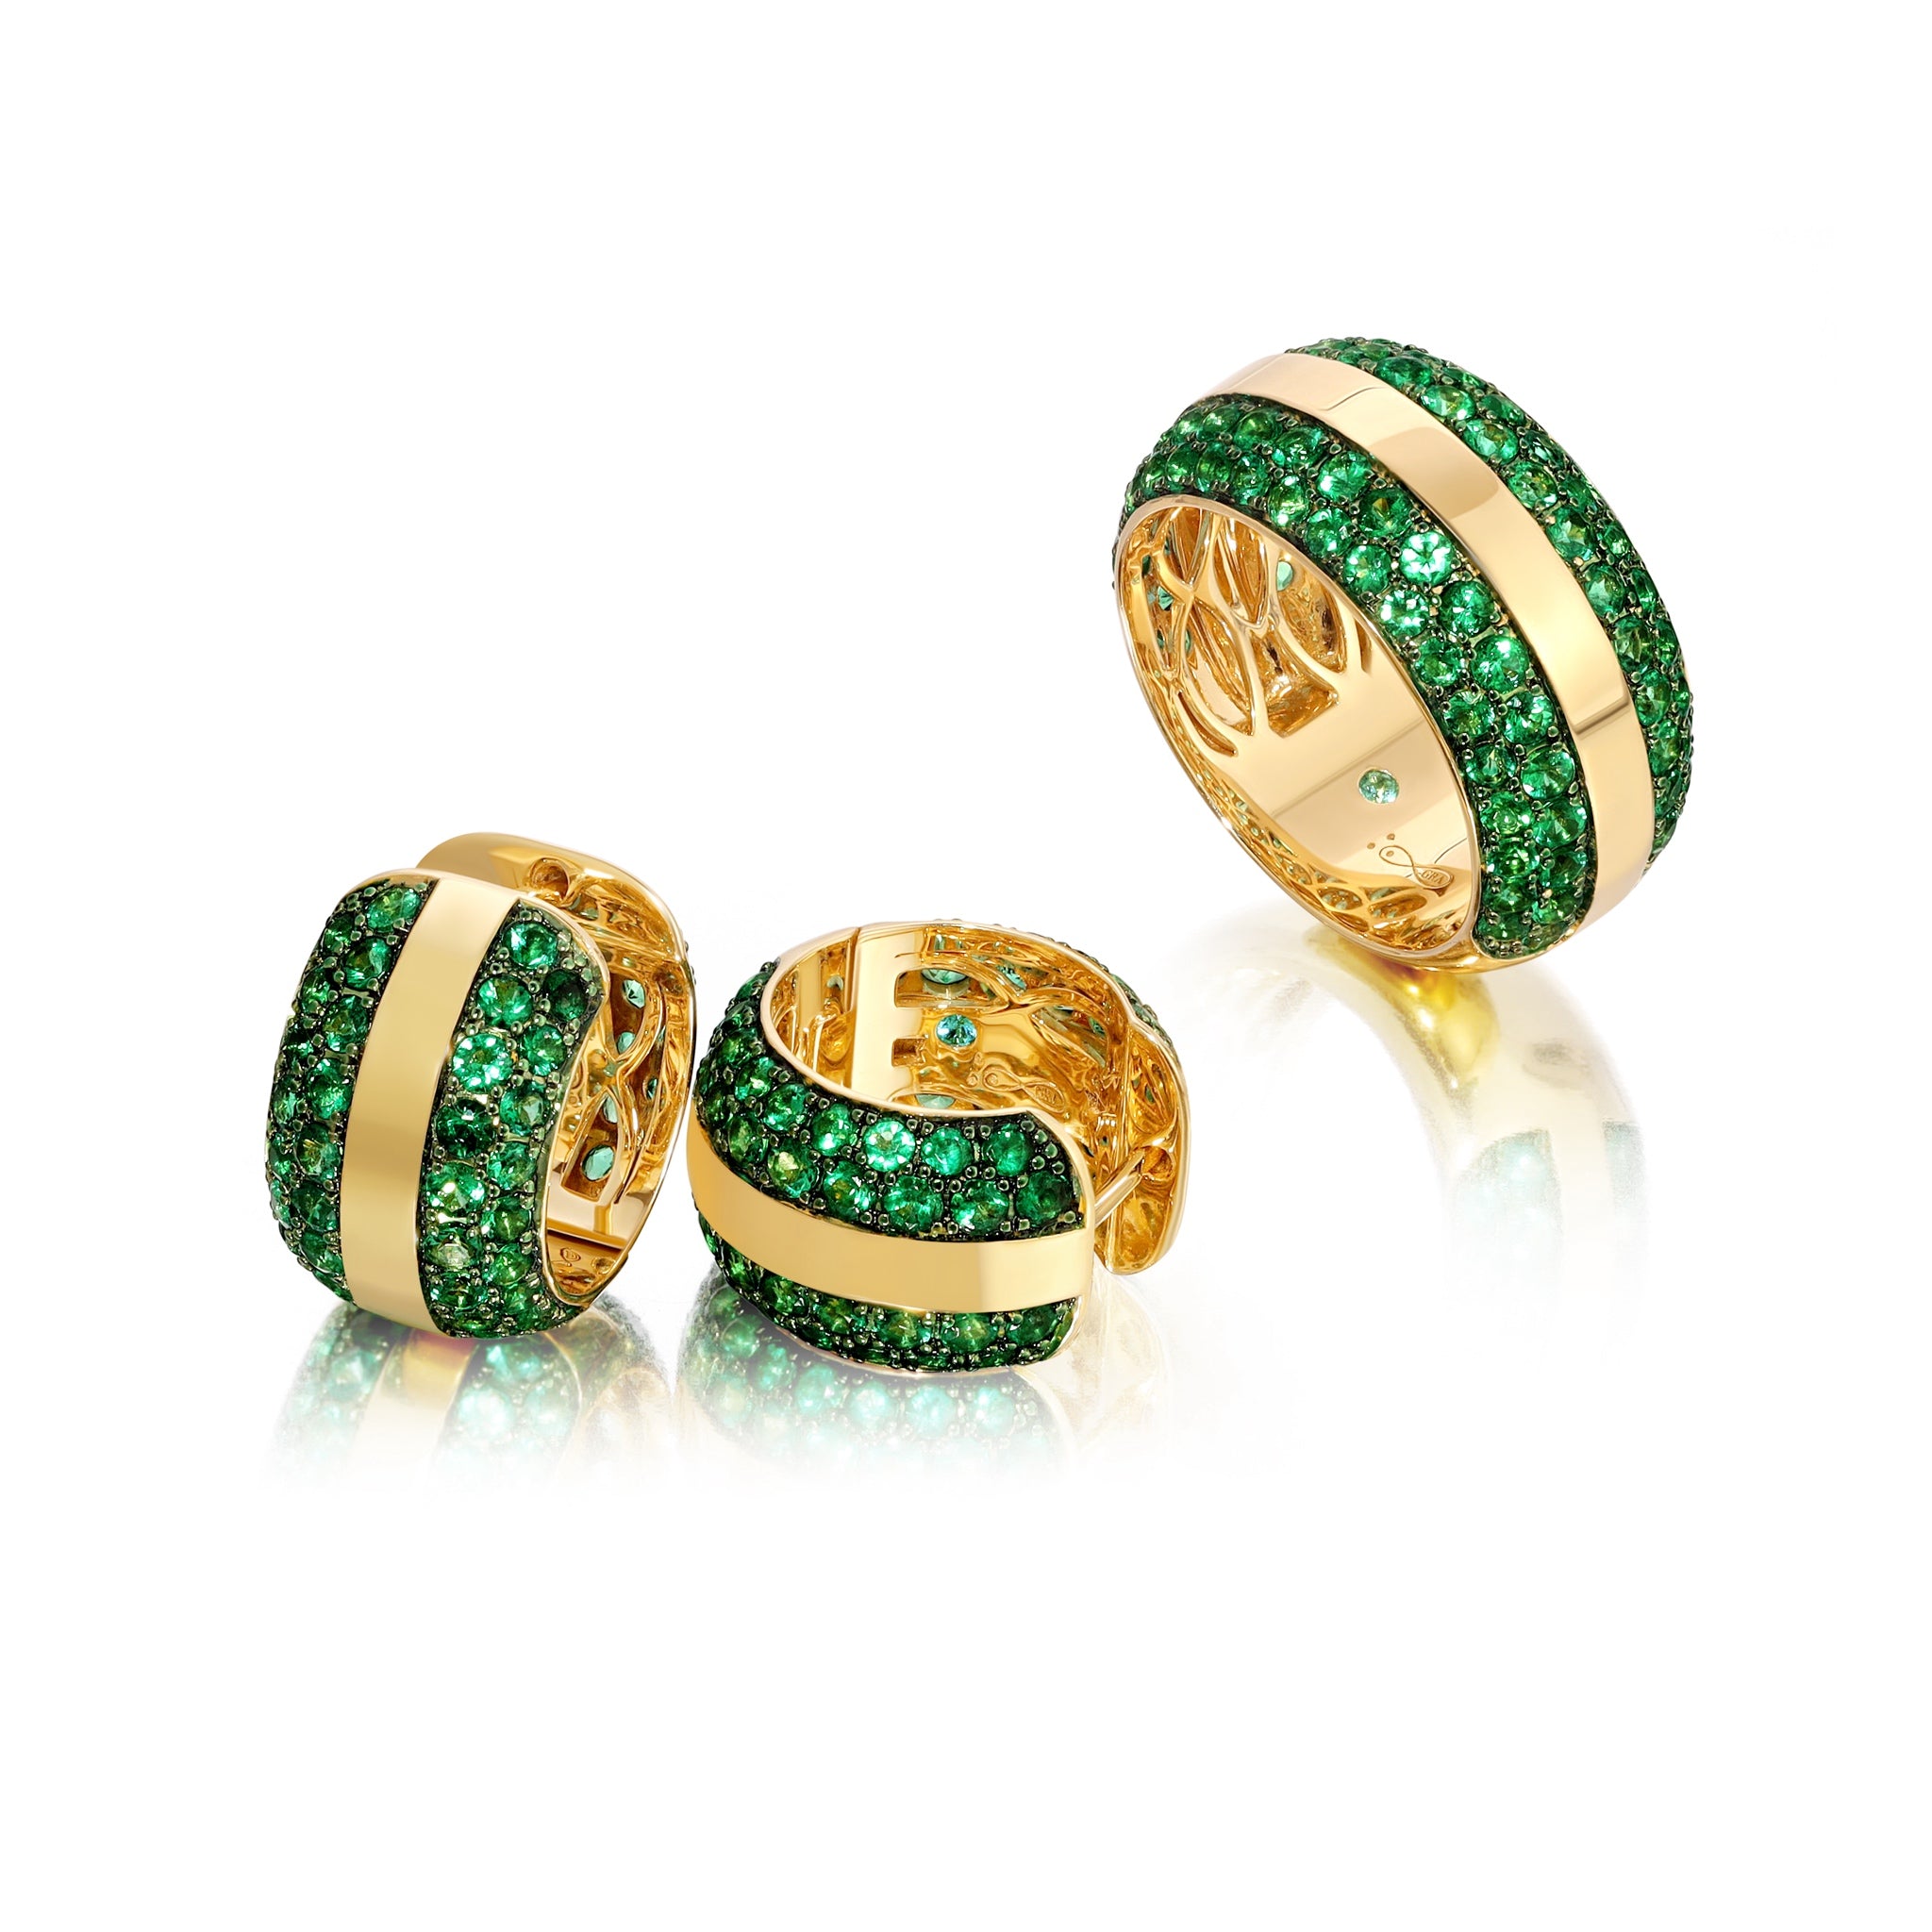 Ouro Emerald Band Ring